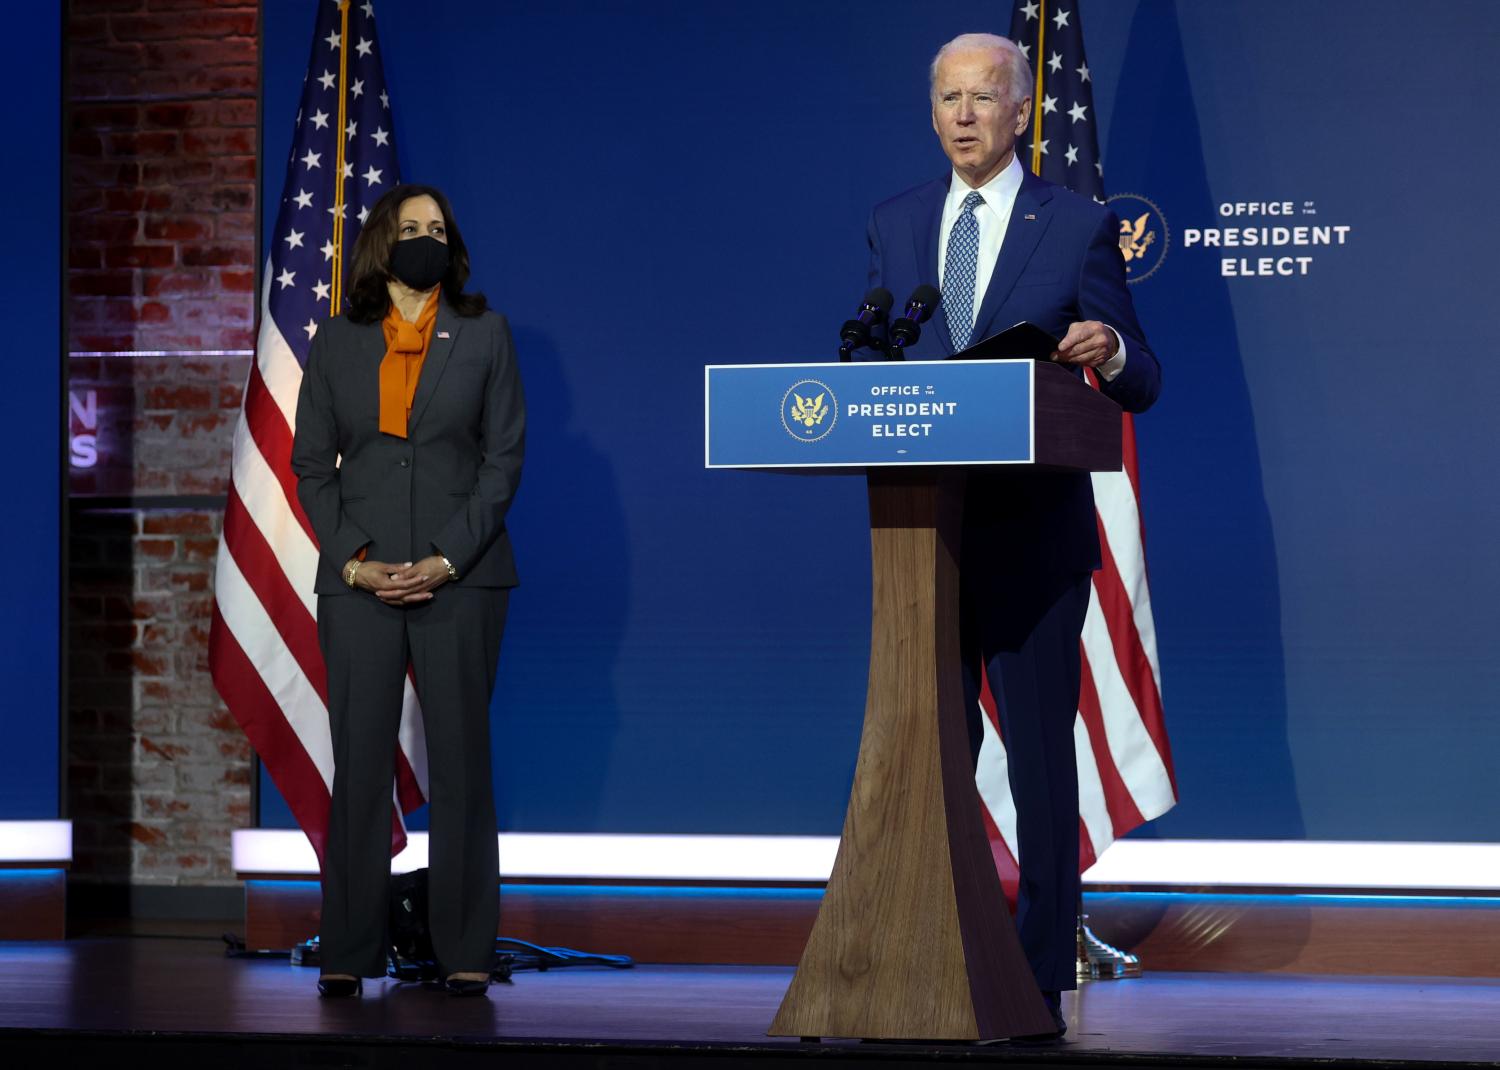 U.S. President-elect Joe Biden and Vice President-elect Kamala Harris address reporters about efforts to confront the coronavirus disease (COVID-19) pandemic after meeting with members of the "Transition COVID-19 Advisory Board" in Wilmington, Delaware, U.S., November 9, 2020. REUTERS/Jonathan Ernst